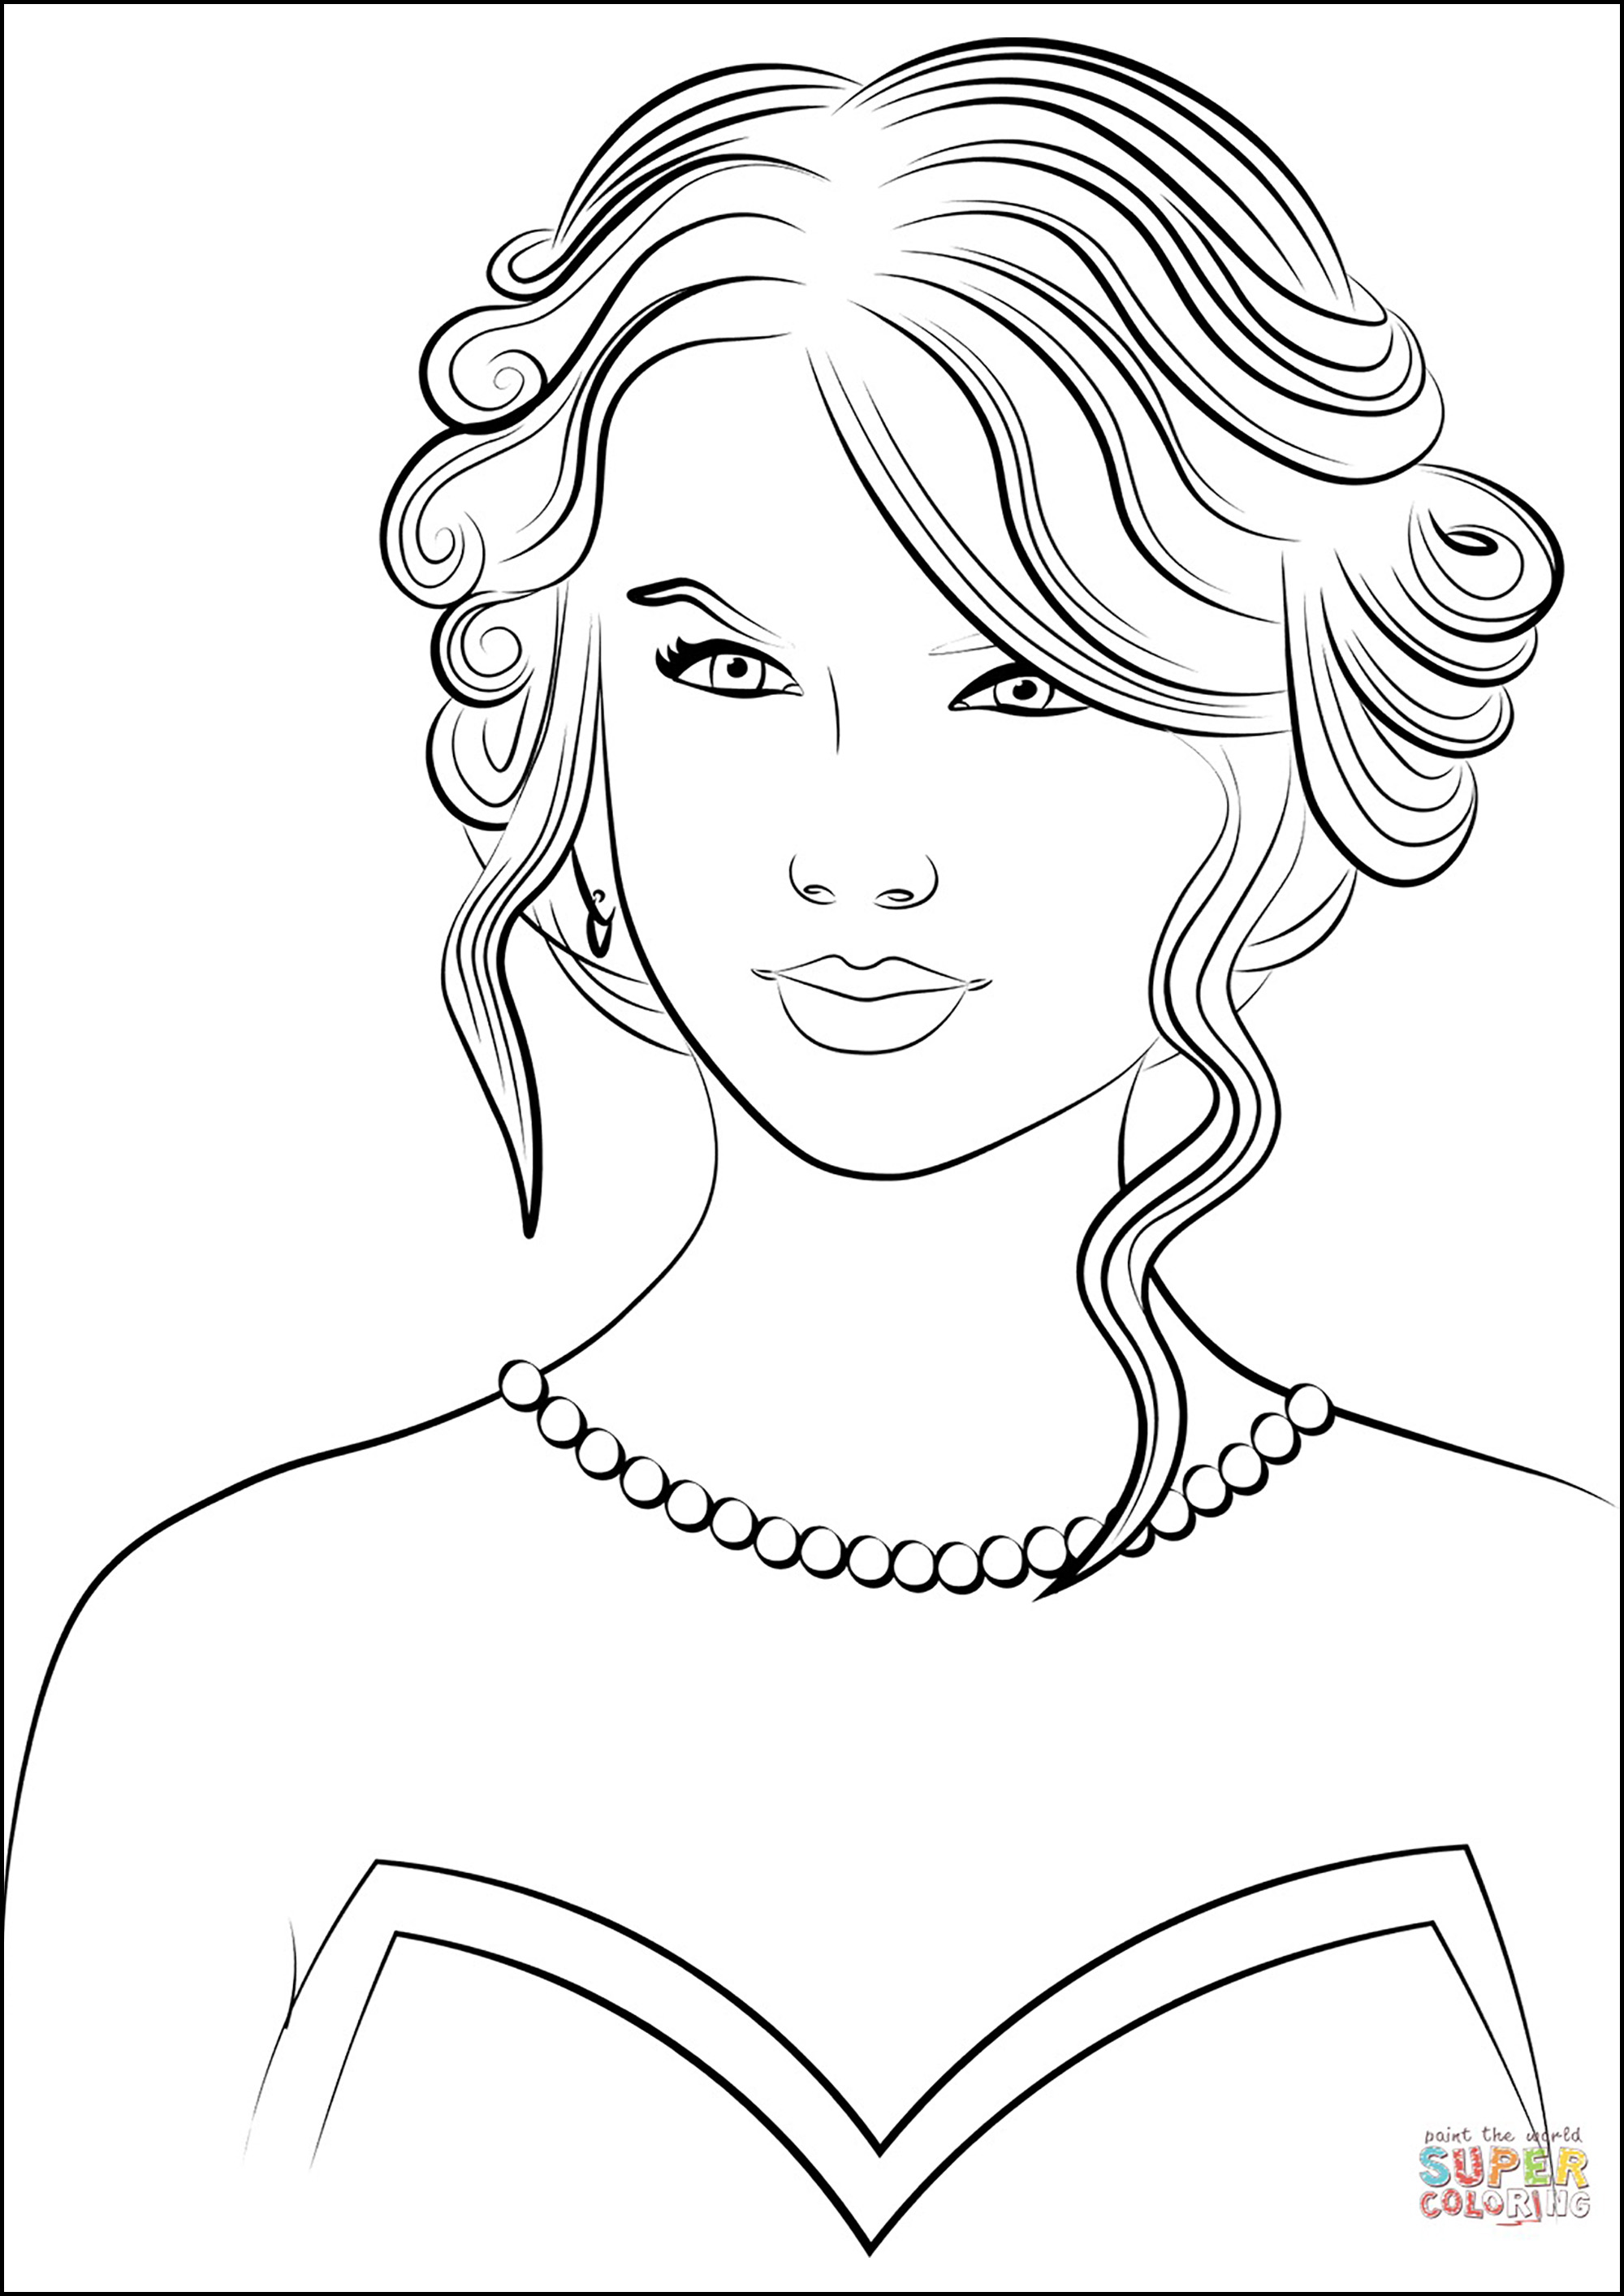 Taylor Swift coloring book - Famous singers Kids Coloring Pages